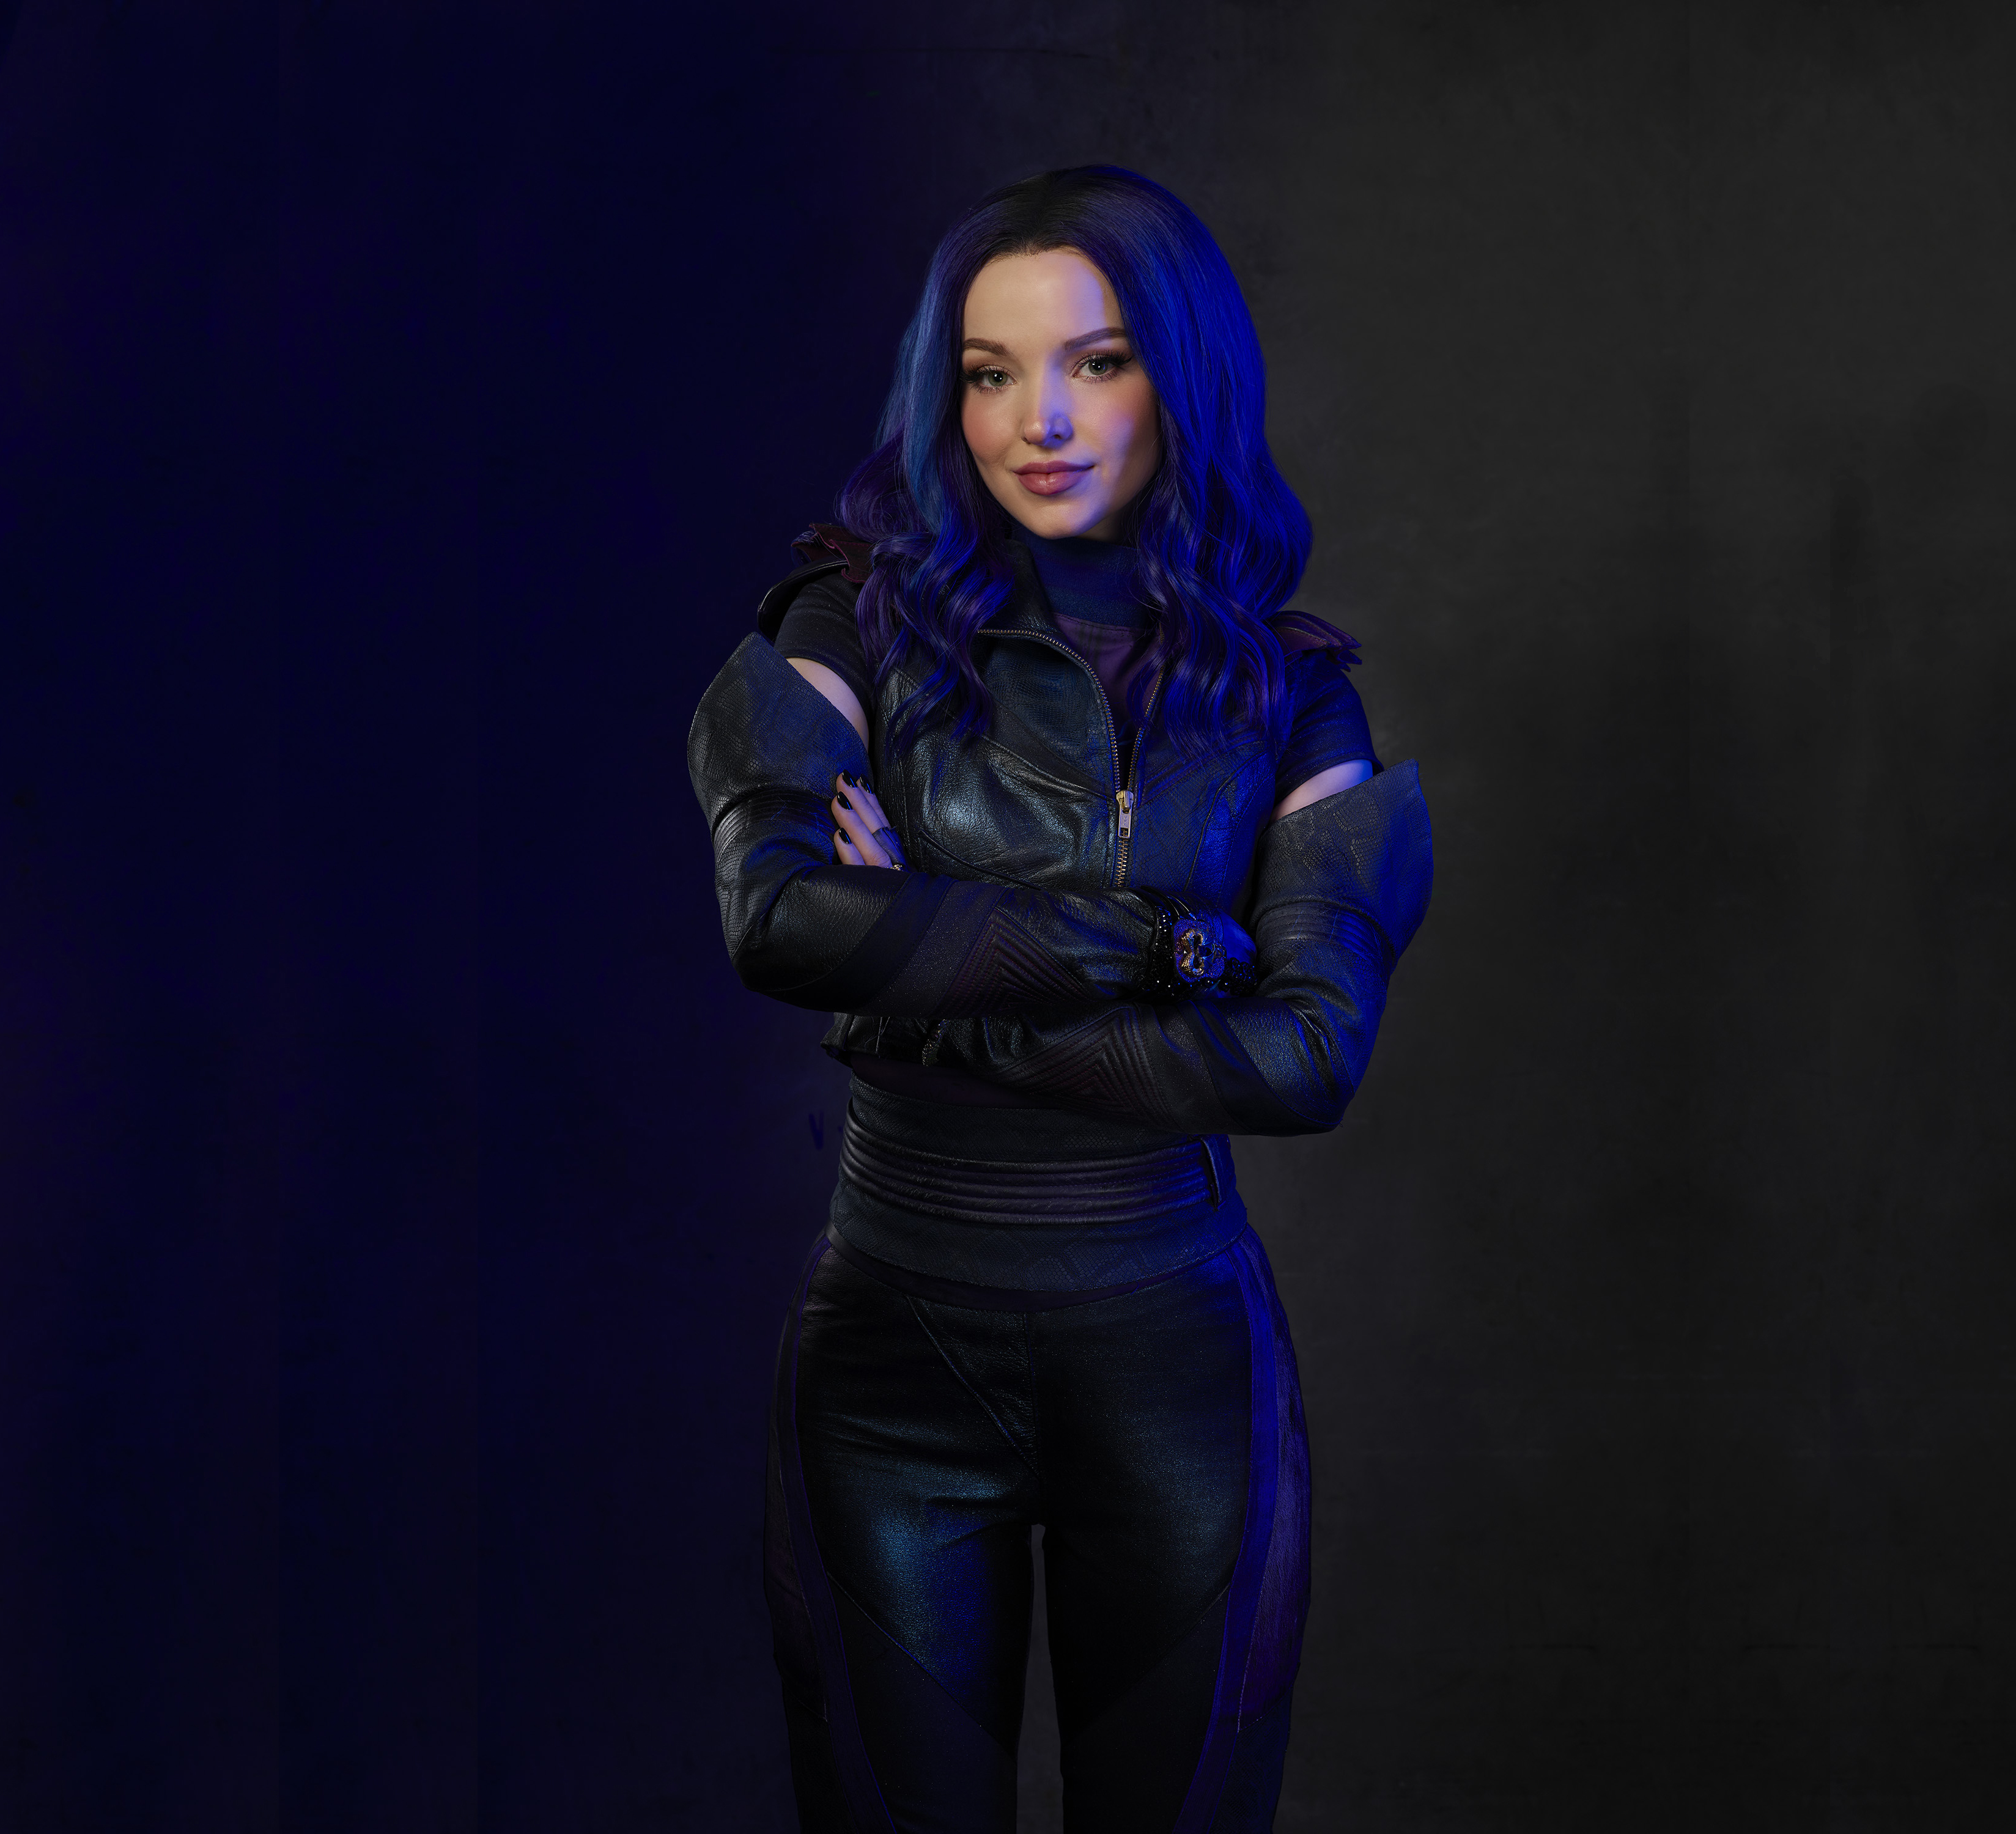 Descendants 3 Dove Cameron as Mal Wallpaper, HD Movies 4K Wallpapers,  Images, Photos and Background - Wallpapers Den